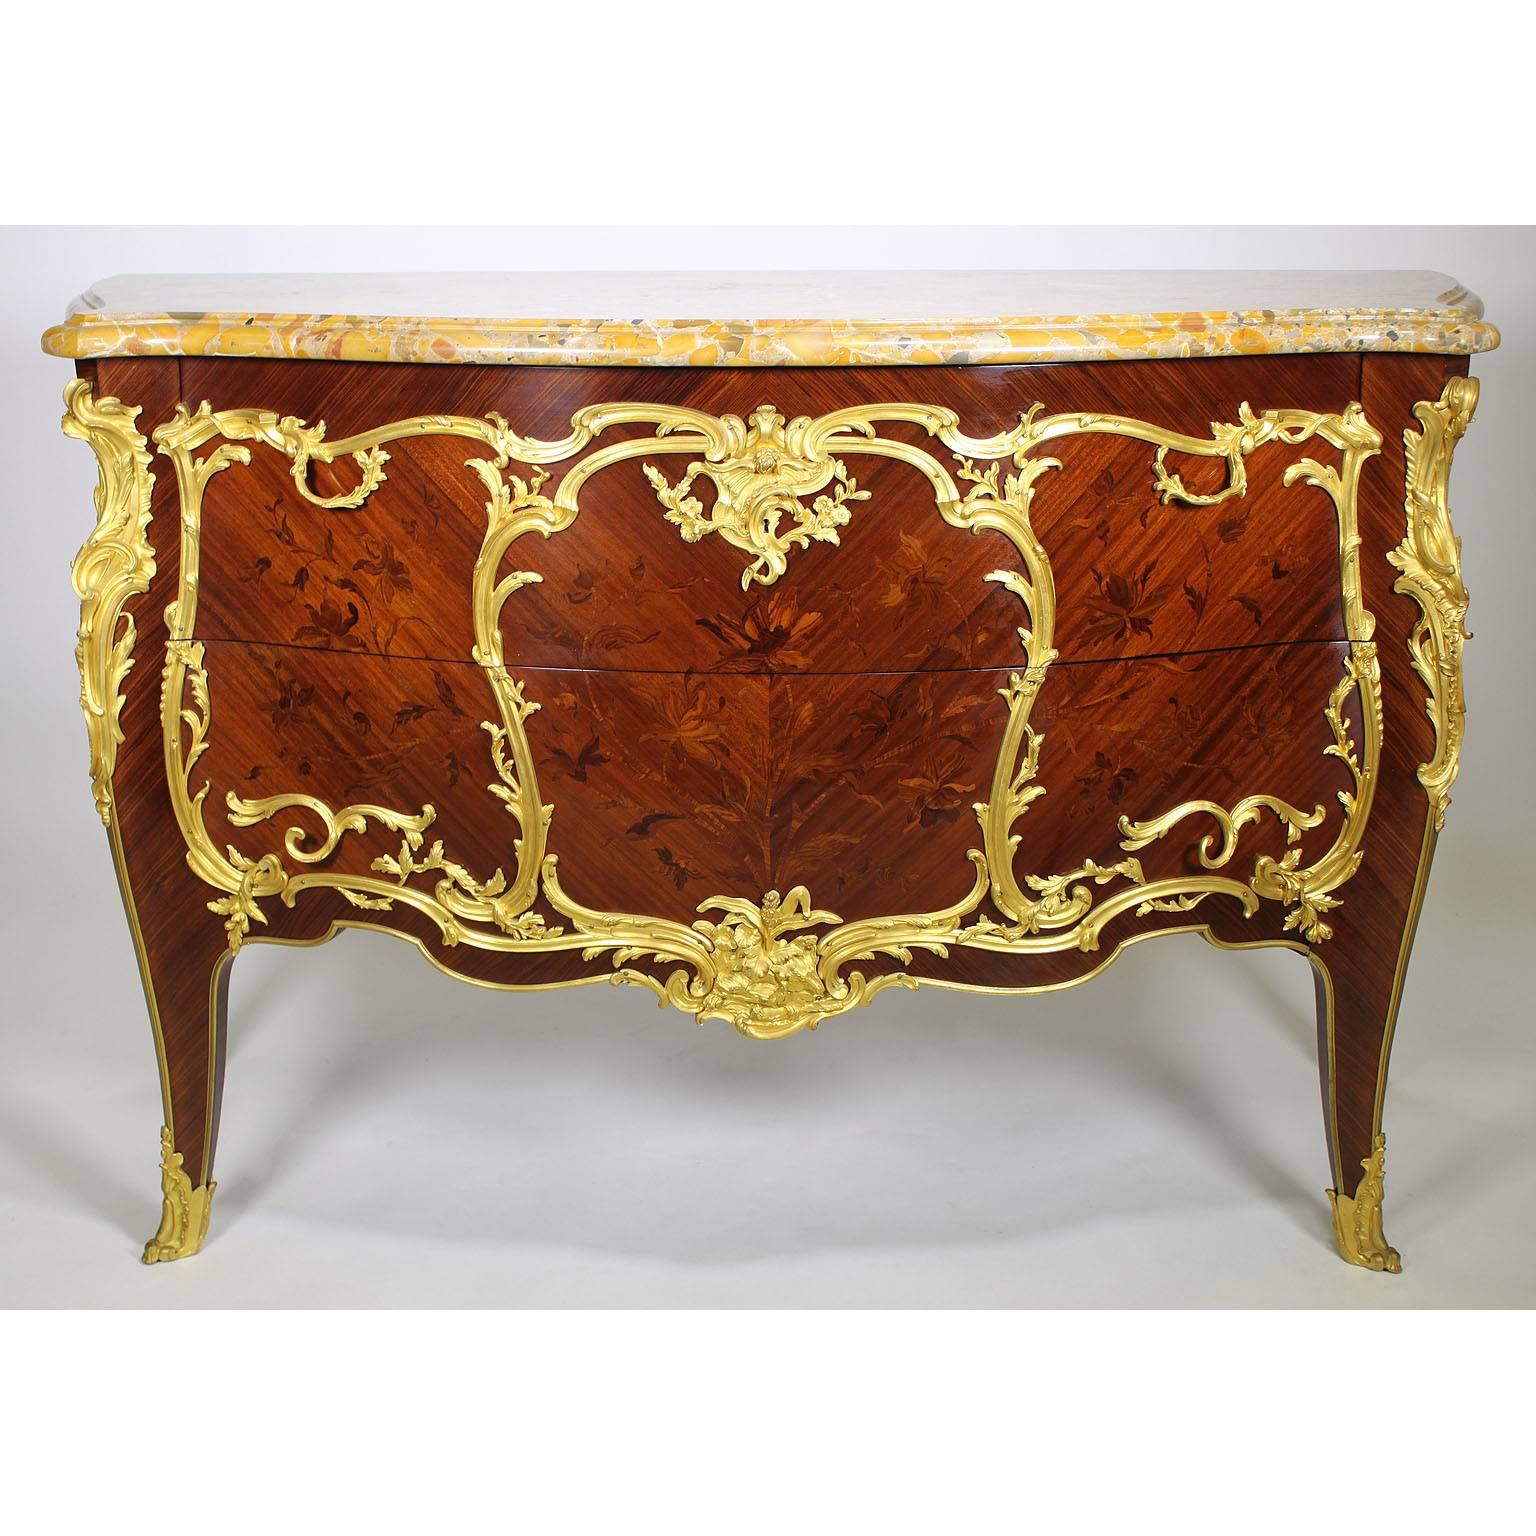 A very fine and impressive pair of French 19th century Louis xv style gilt bronze-mounted kingwood, satinwood and tulipwood floral marquetry two-drawer bombé commodes attributed to François Linke, index number 1810, Paris, late 19th-early 20th